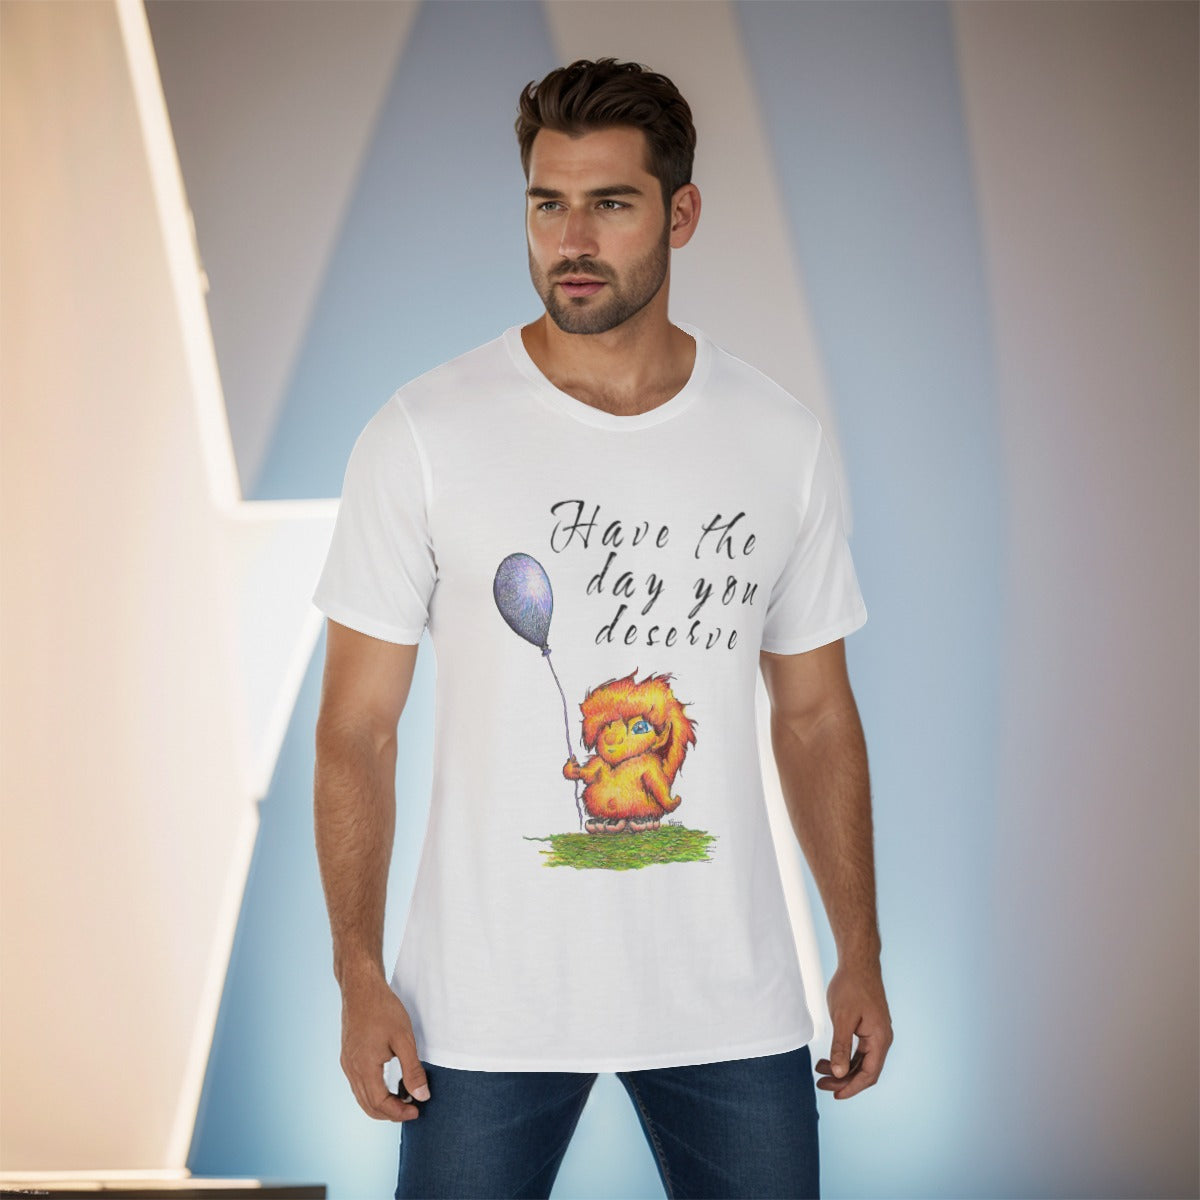 Have The Day You Deserve "w" O-Neck T-Shirt